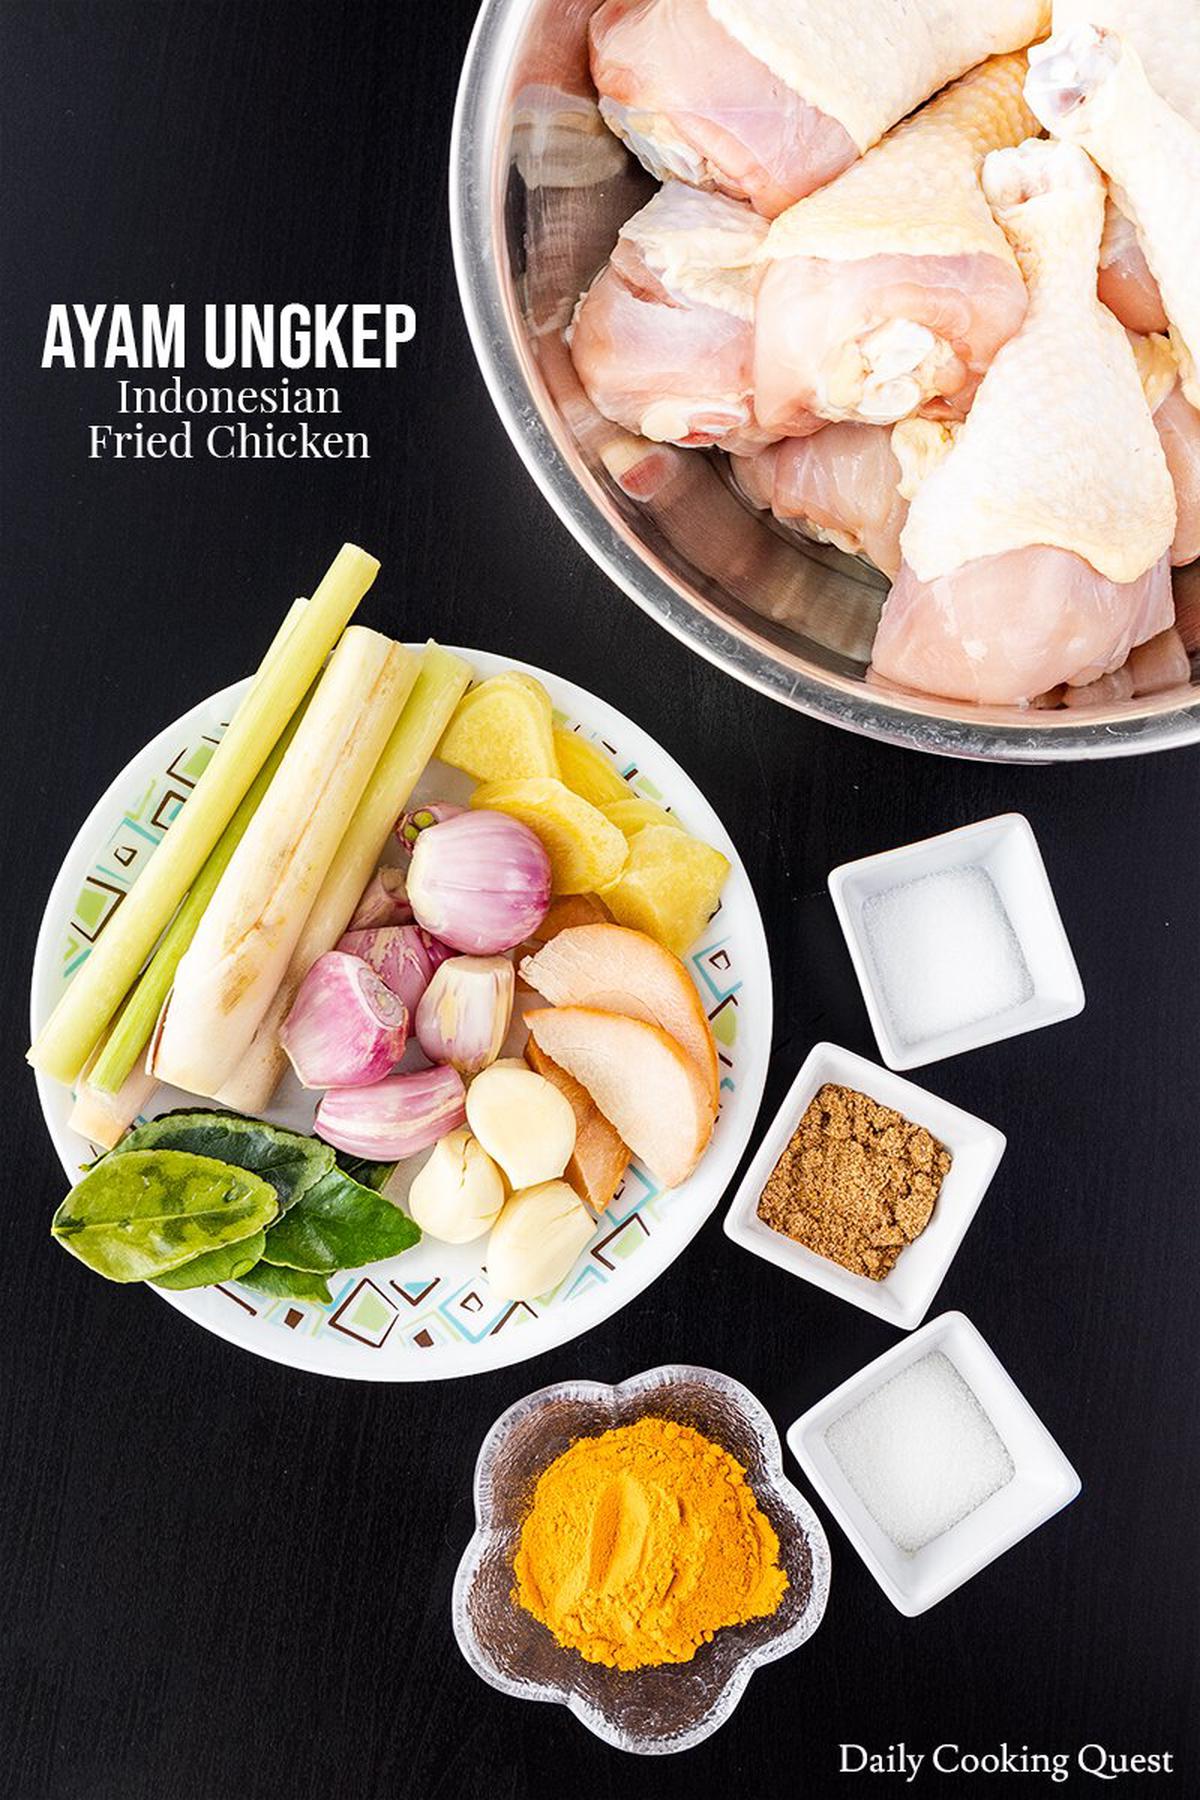 Ingredients for Ayam Ungkep - Indonesian Fried Chicken